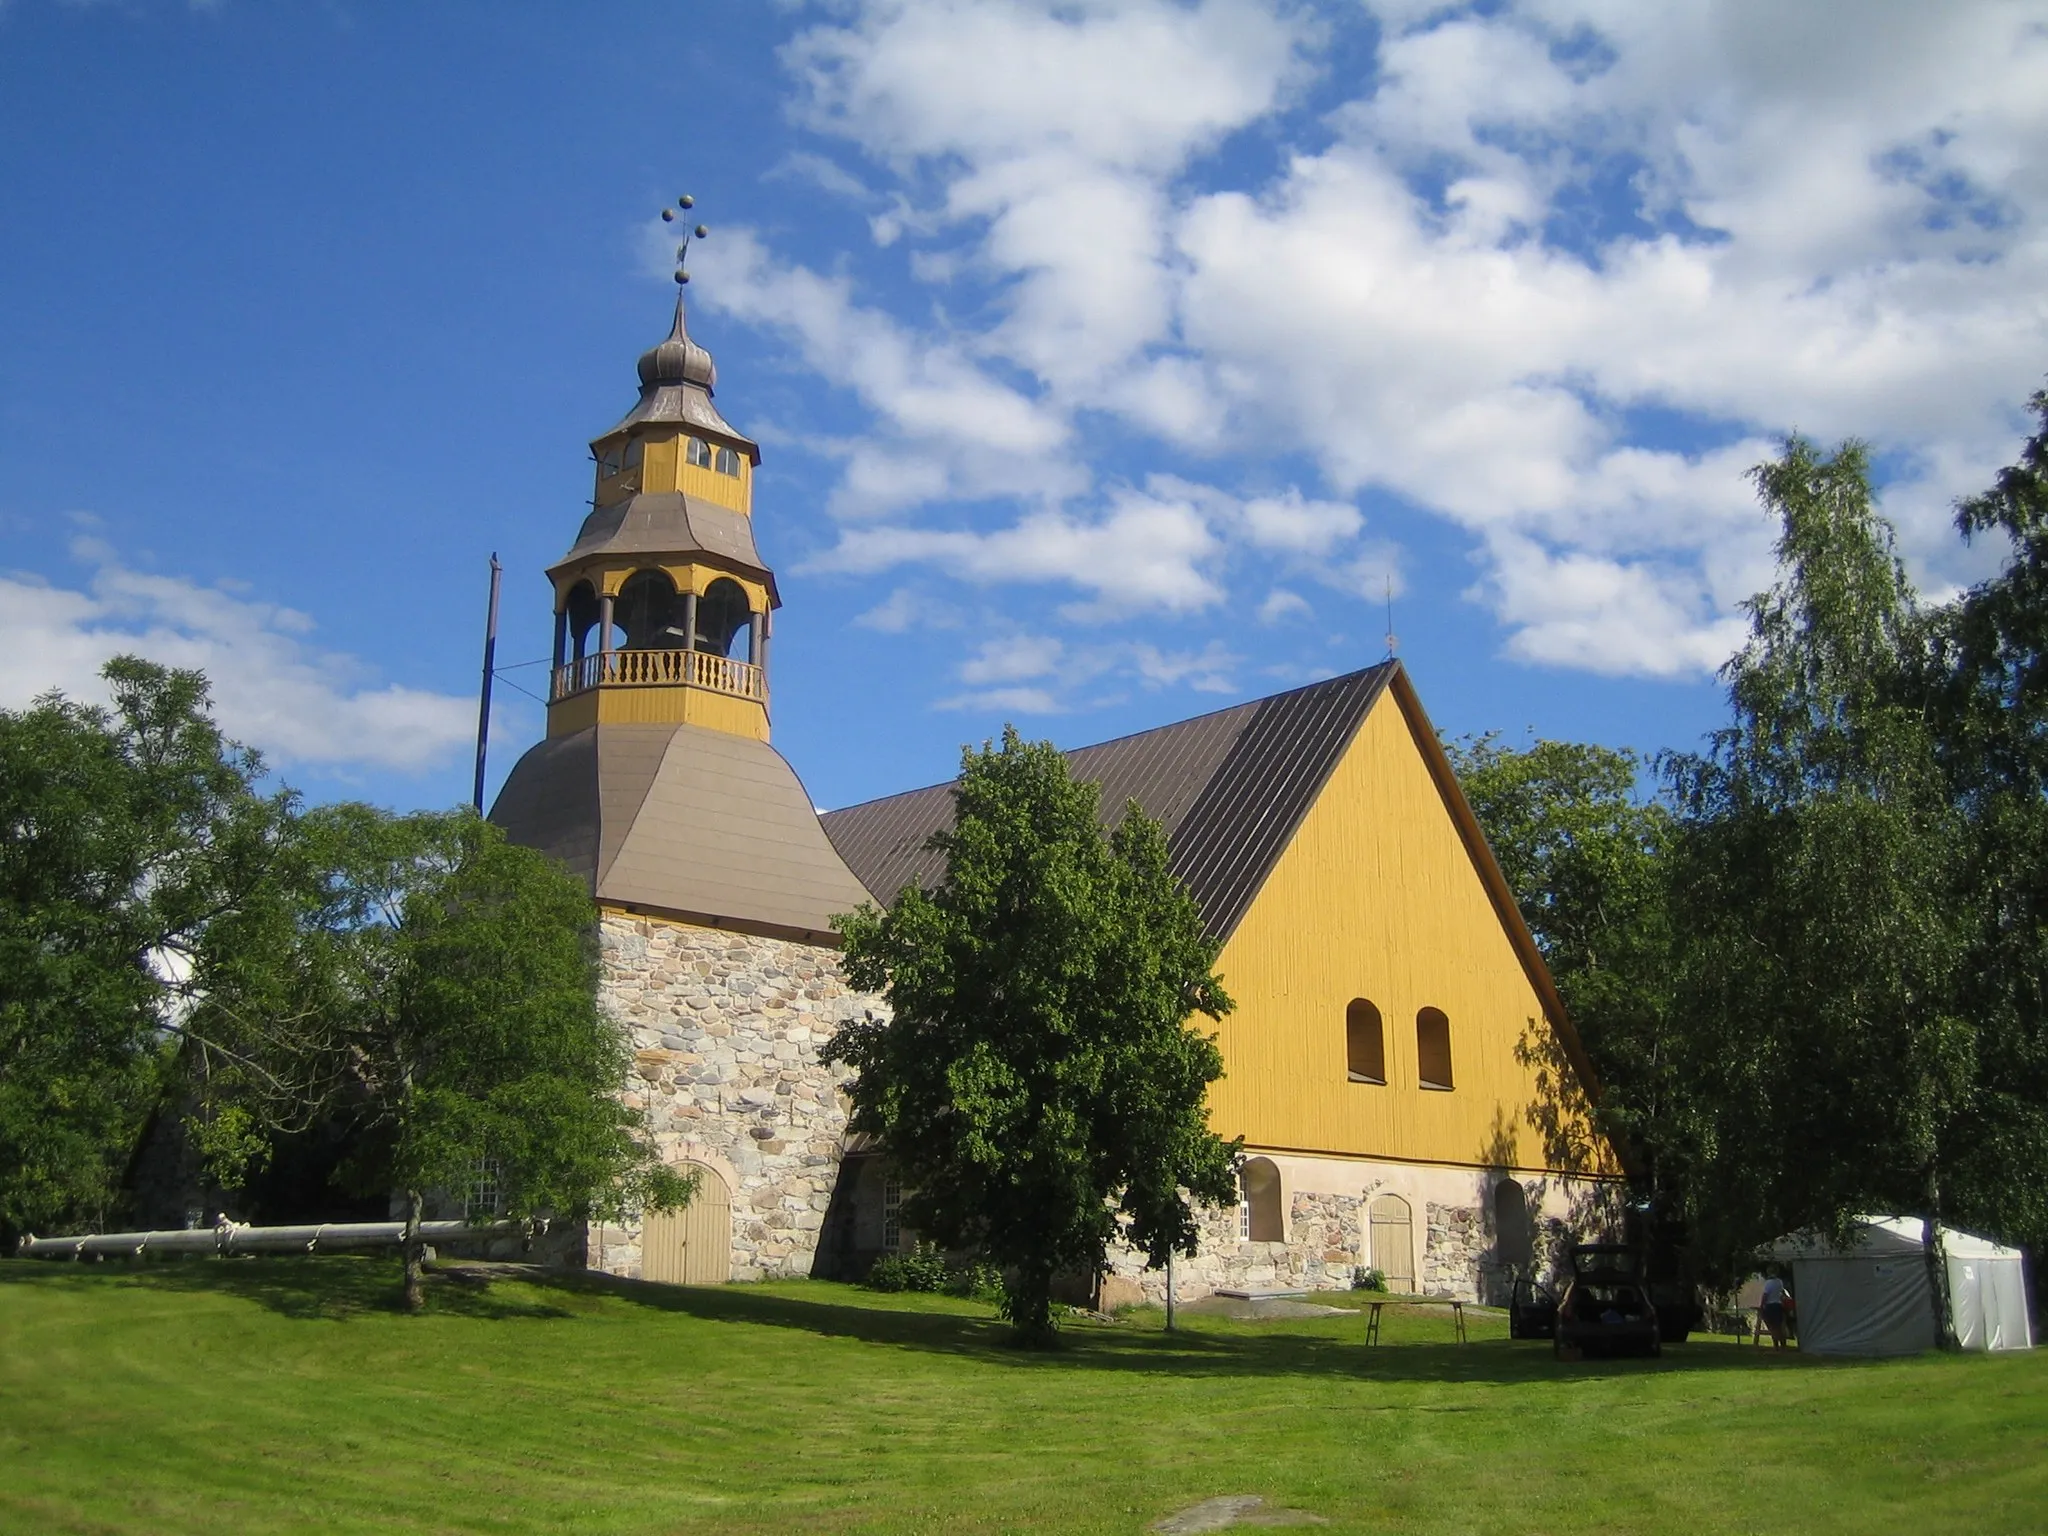 Photo showing: The old church of Uusikaupunki, Finland.